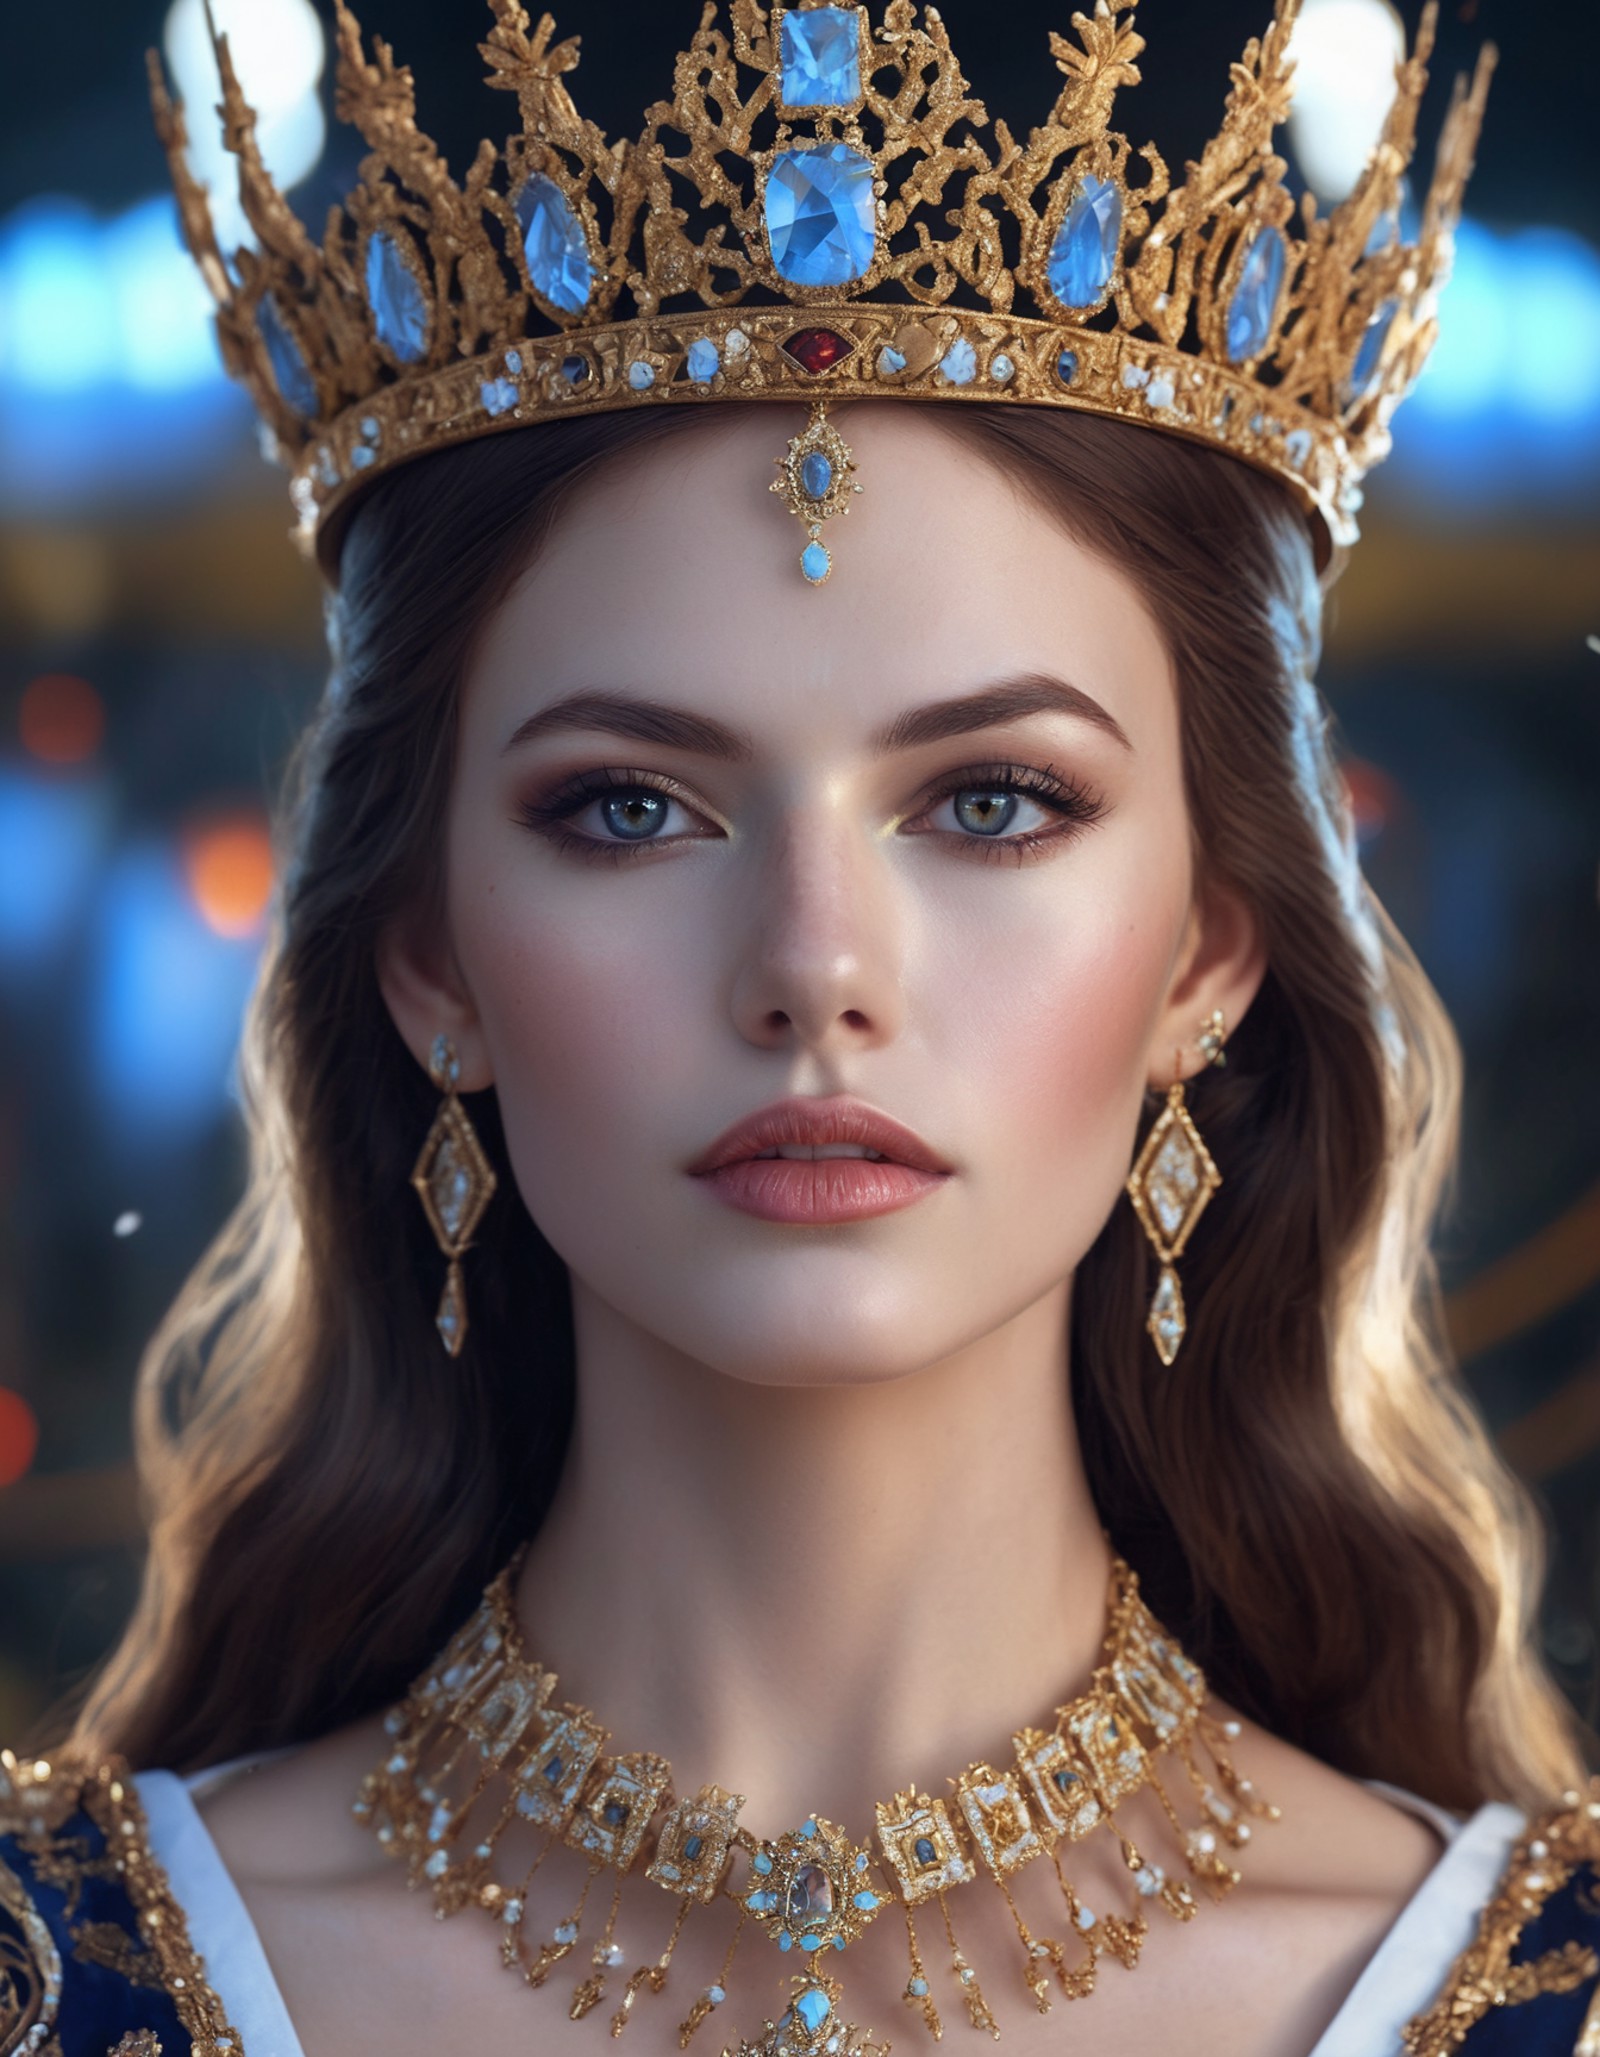 cinematic photo highly detailed portrait of ((ohwx woman)) as an elegant goddess, ornate crown, beautiful symmetrical face...